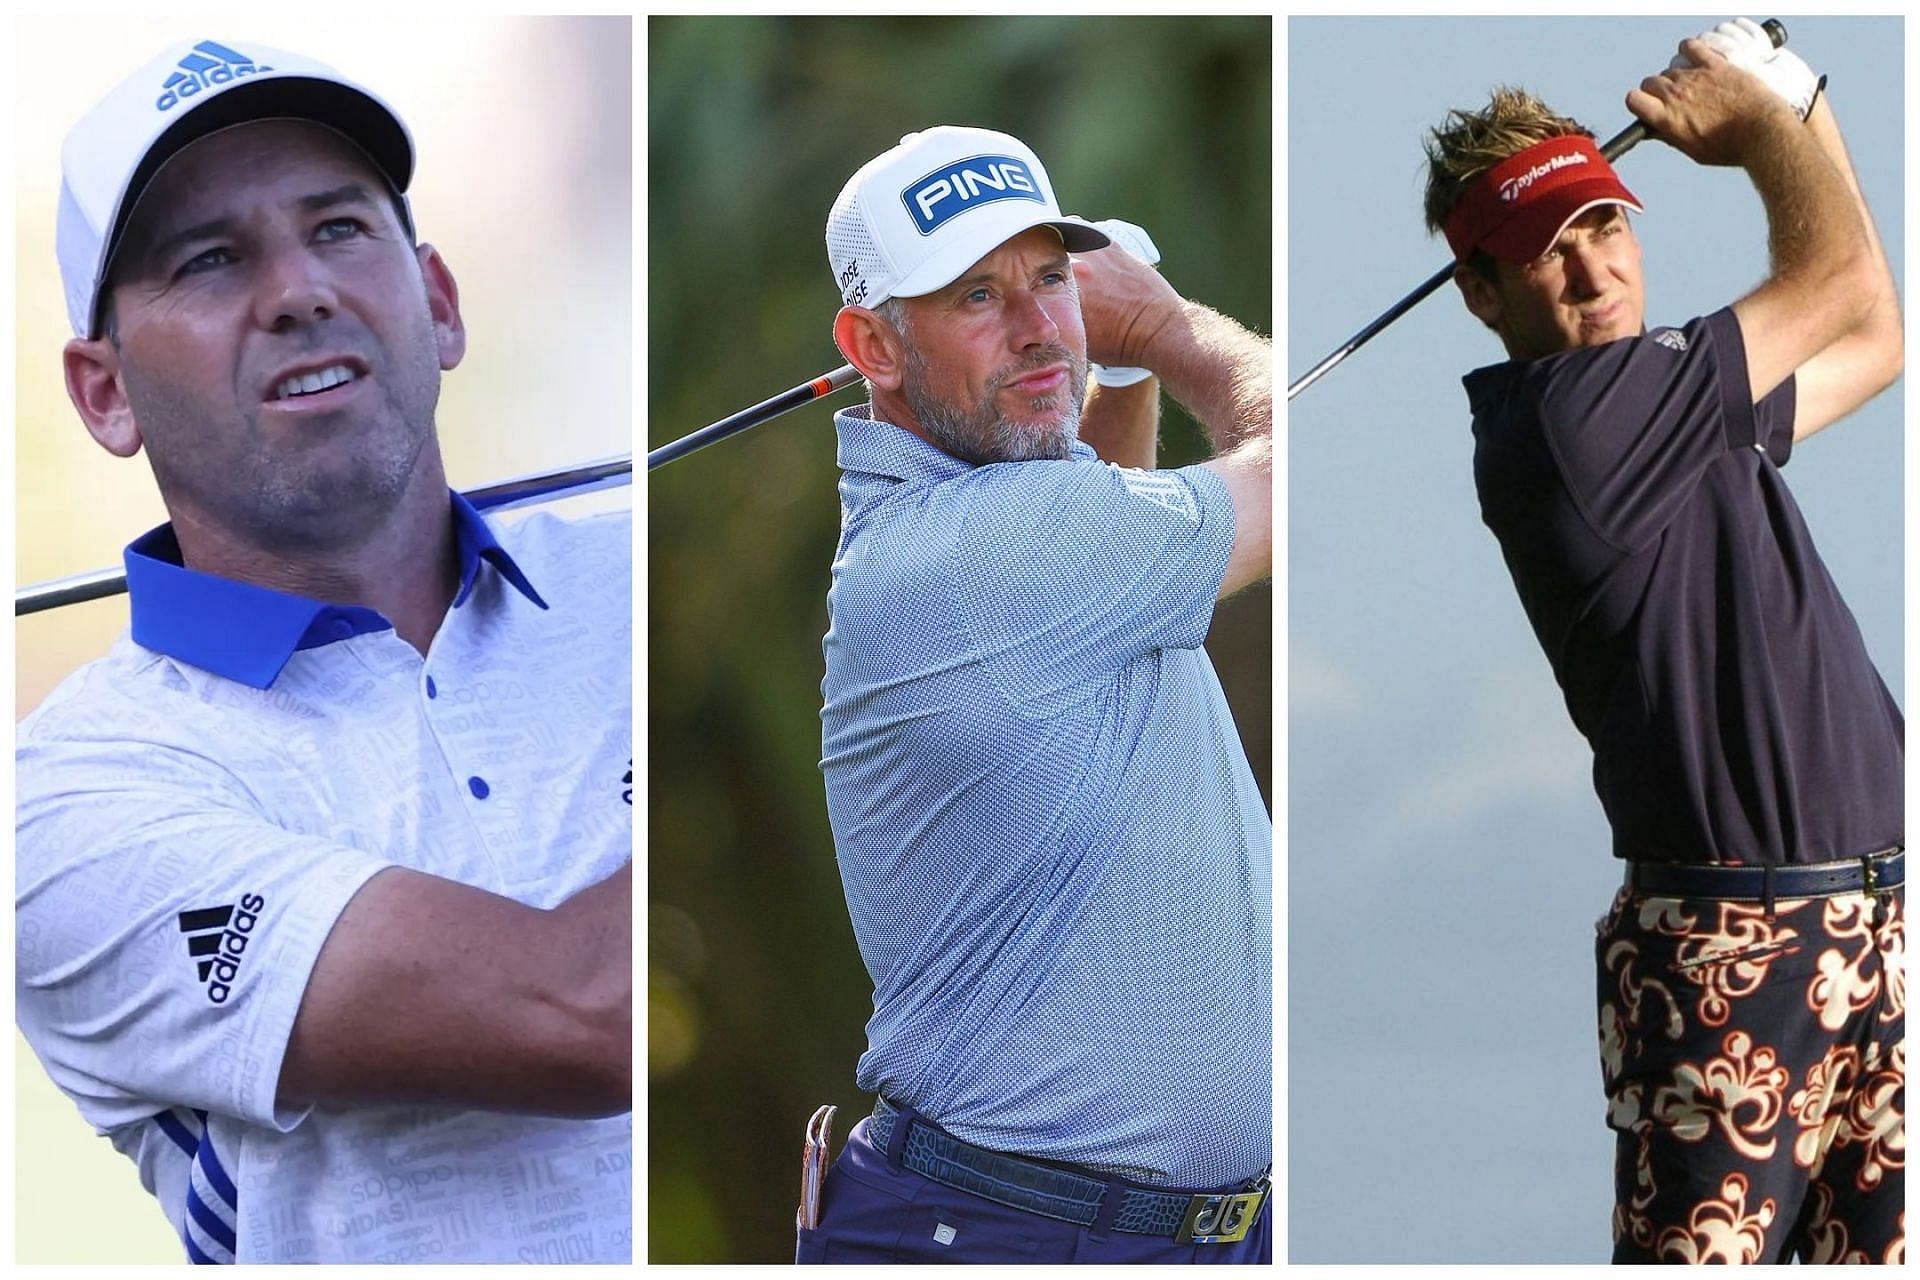 From Left: Sergio Garcia, Lee Westwood, and Ian Poulter resigned from the DP World Tour earlier this year